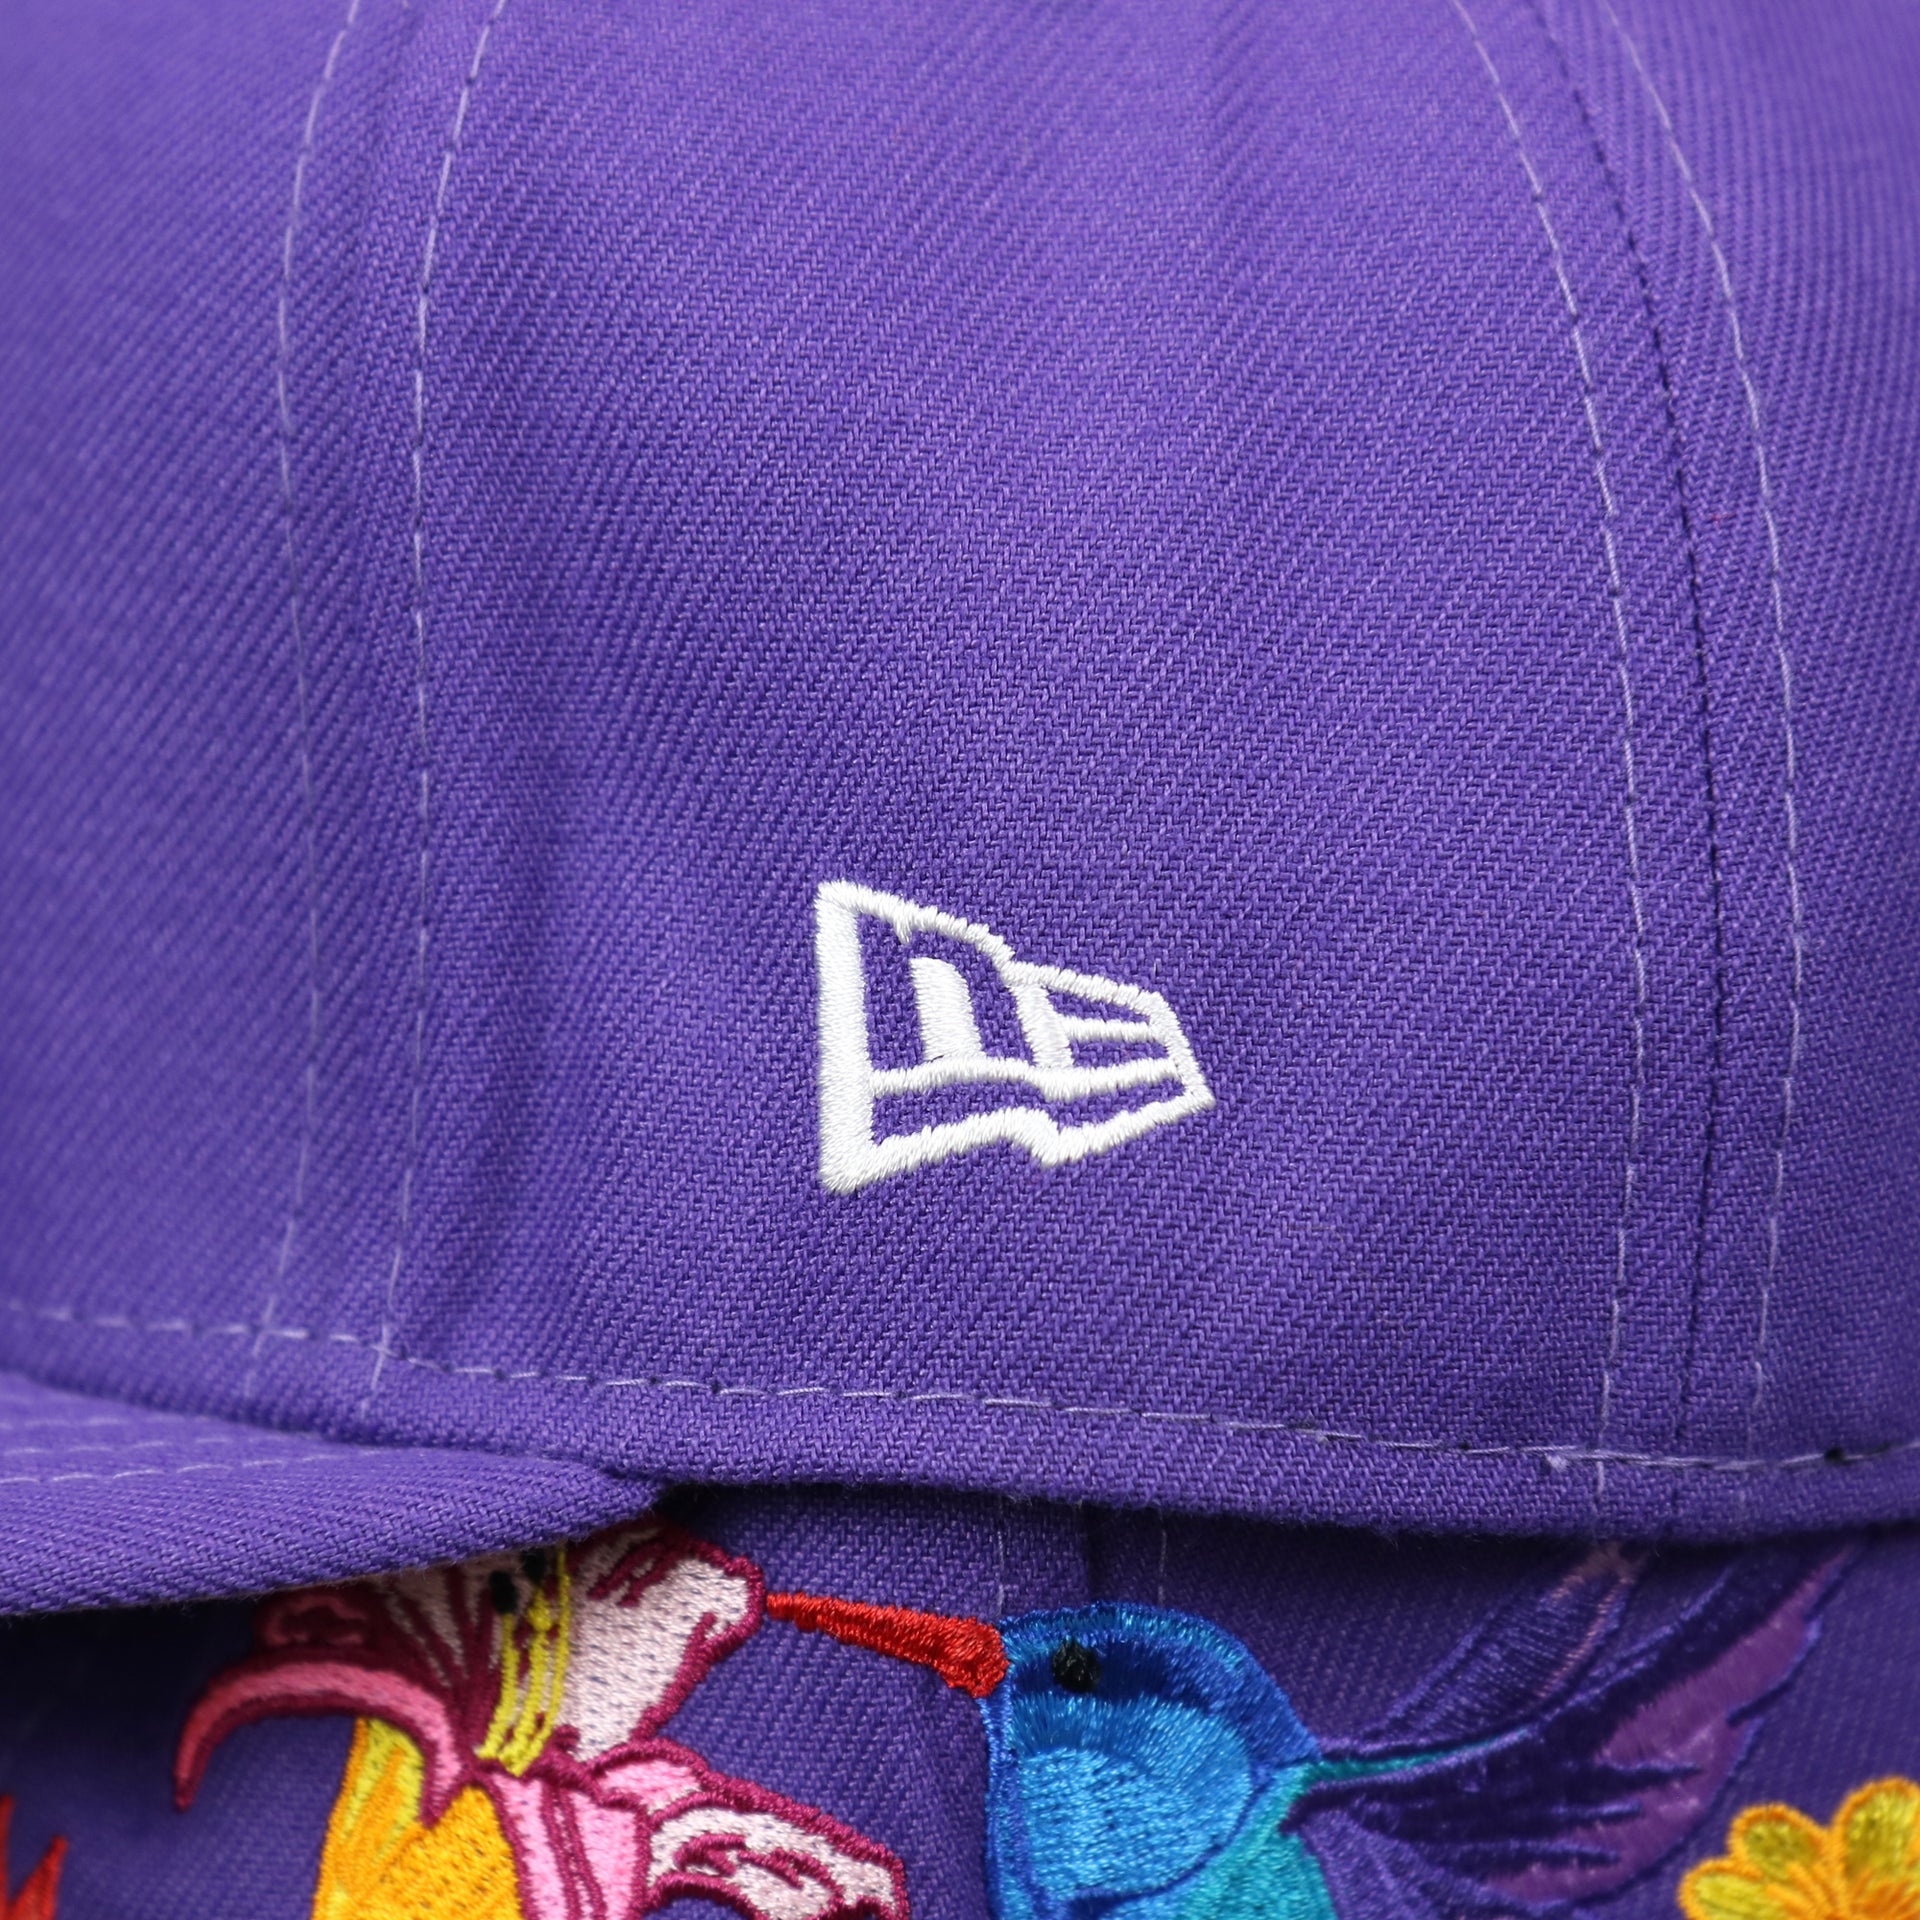 The New Era Logo on the Cooperstown Arizona Diamondbacks Gray Bottom Bloom Spring Embroidery 59Fifty Fitted Cap | Purple 59Fifty Cap